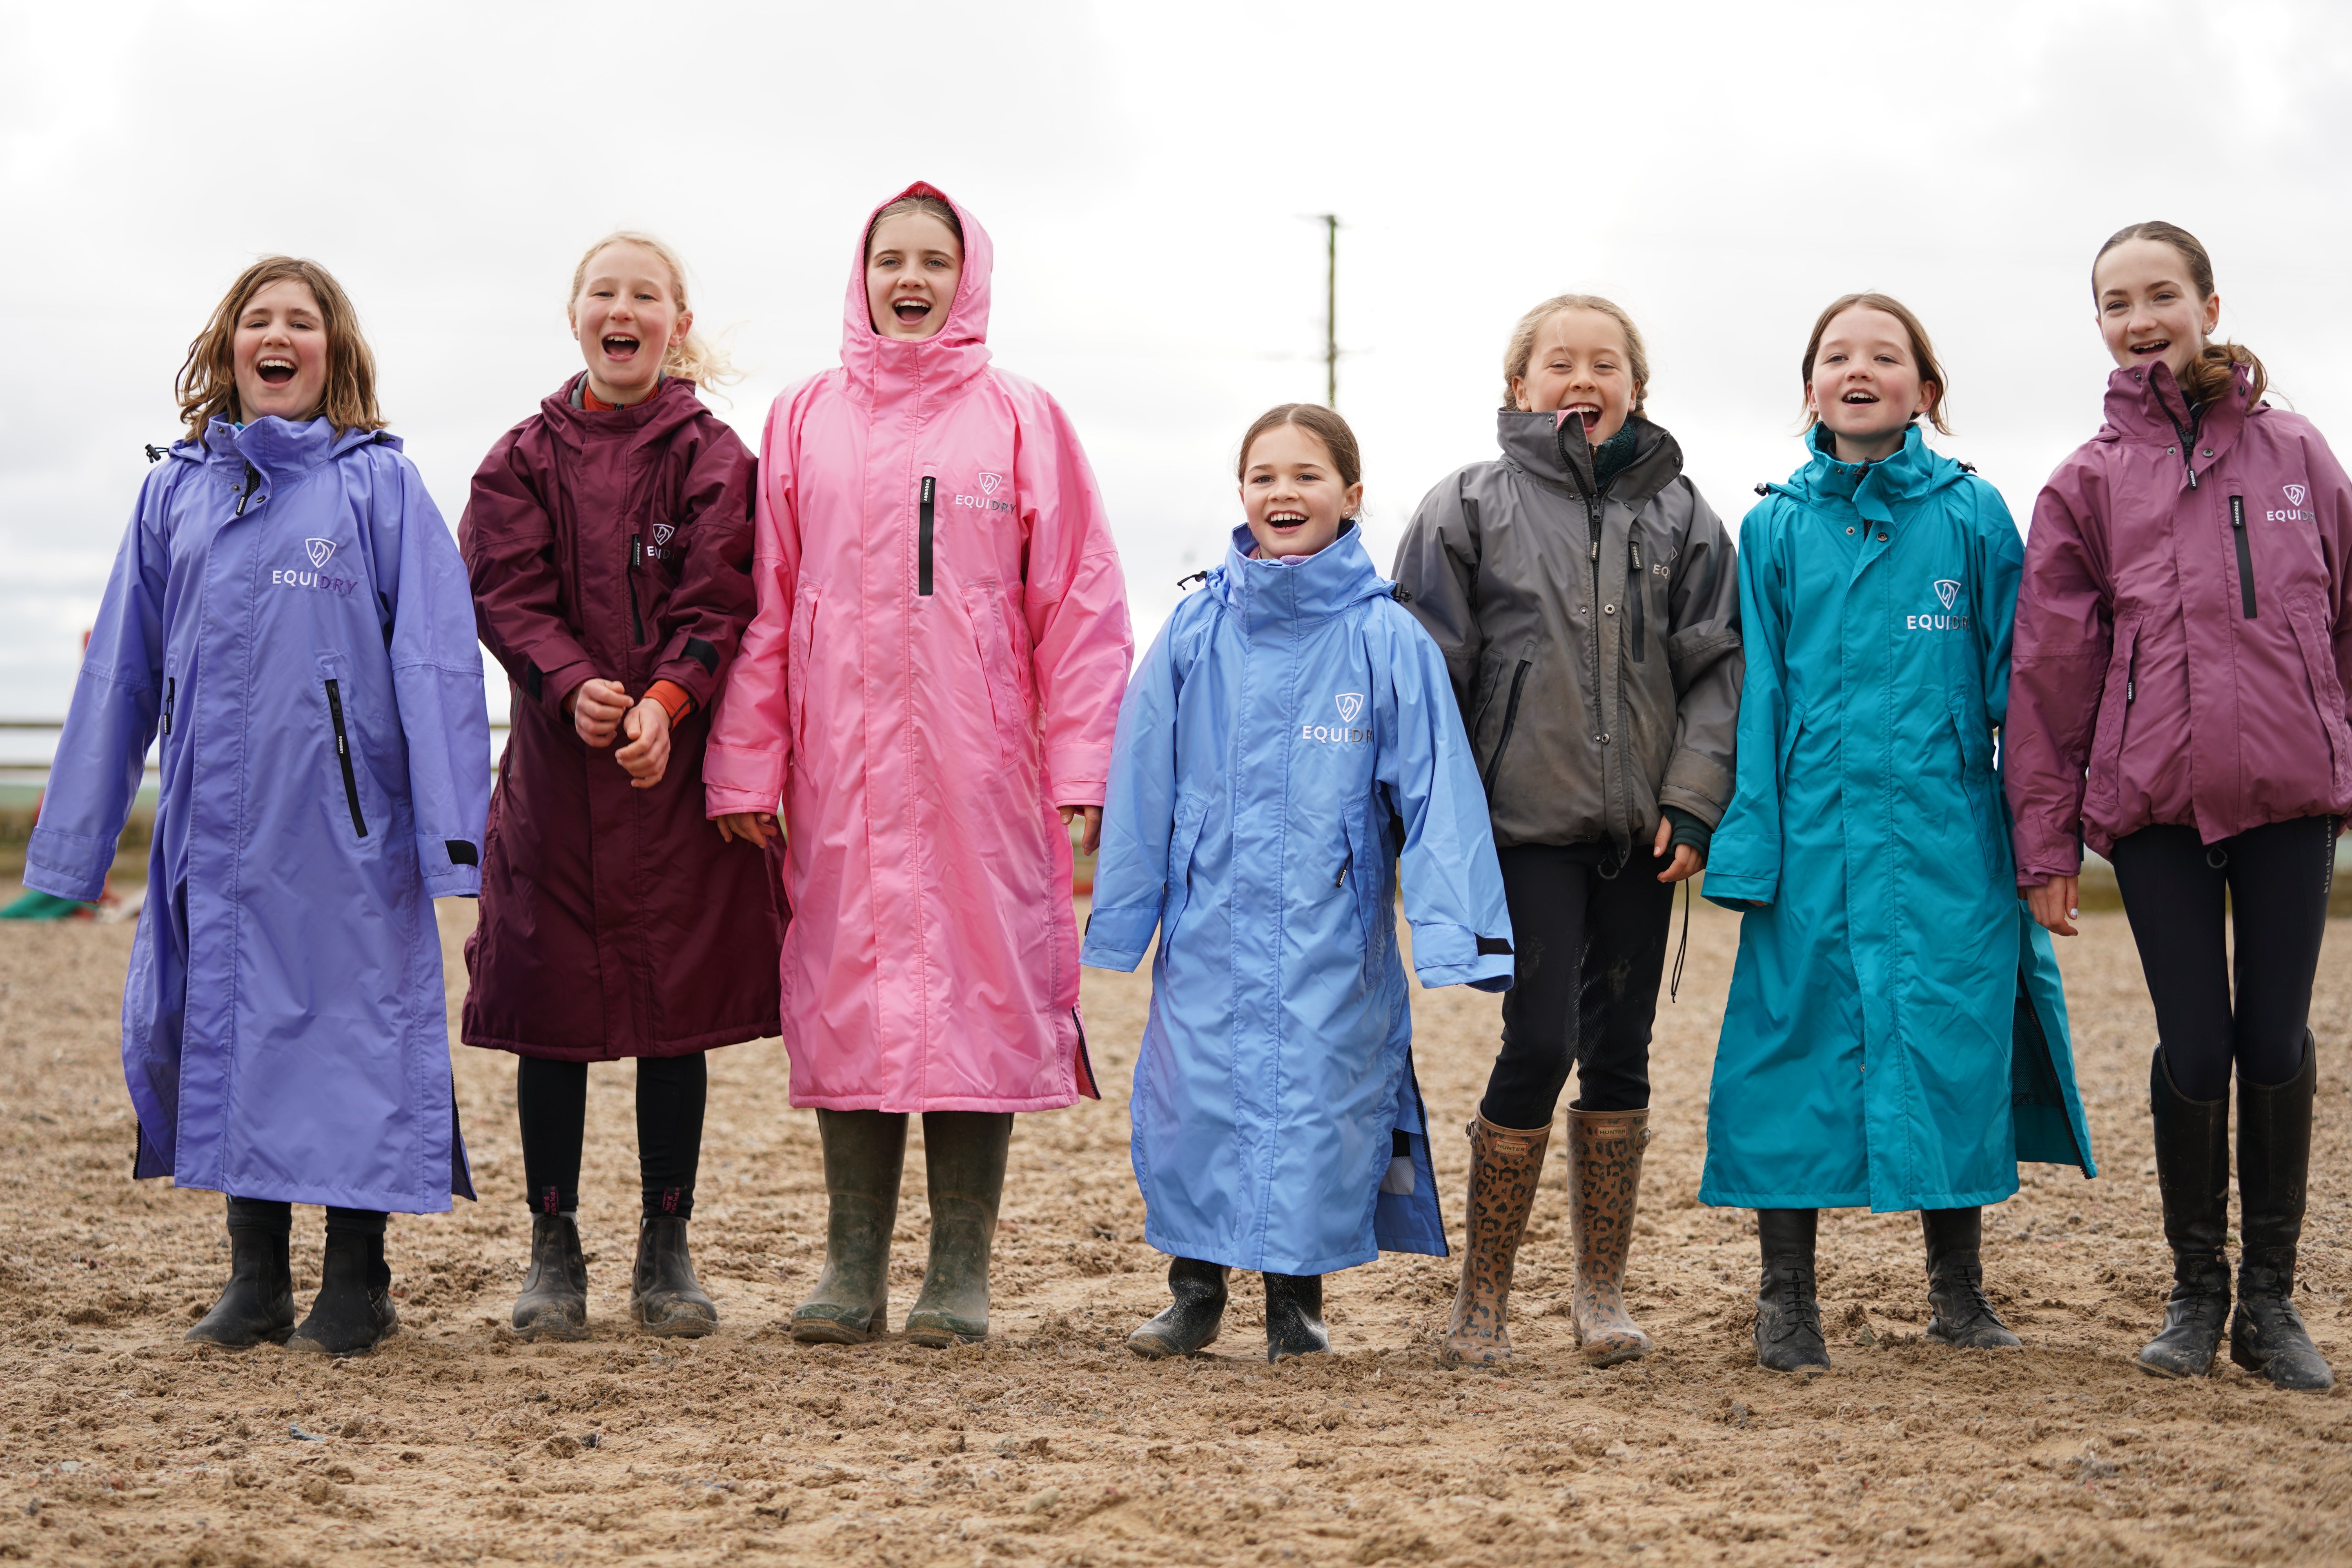 EQUIDRY Equestrian waterproof Coats modelled by Pony Camp Children in Dressage arena 